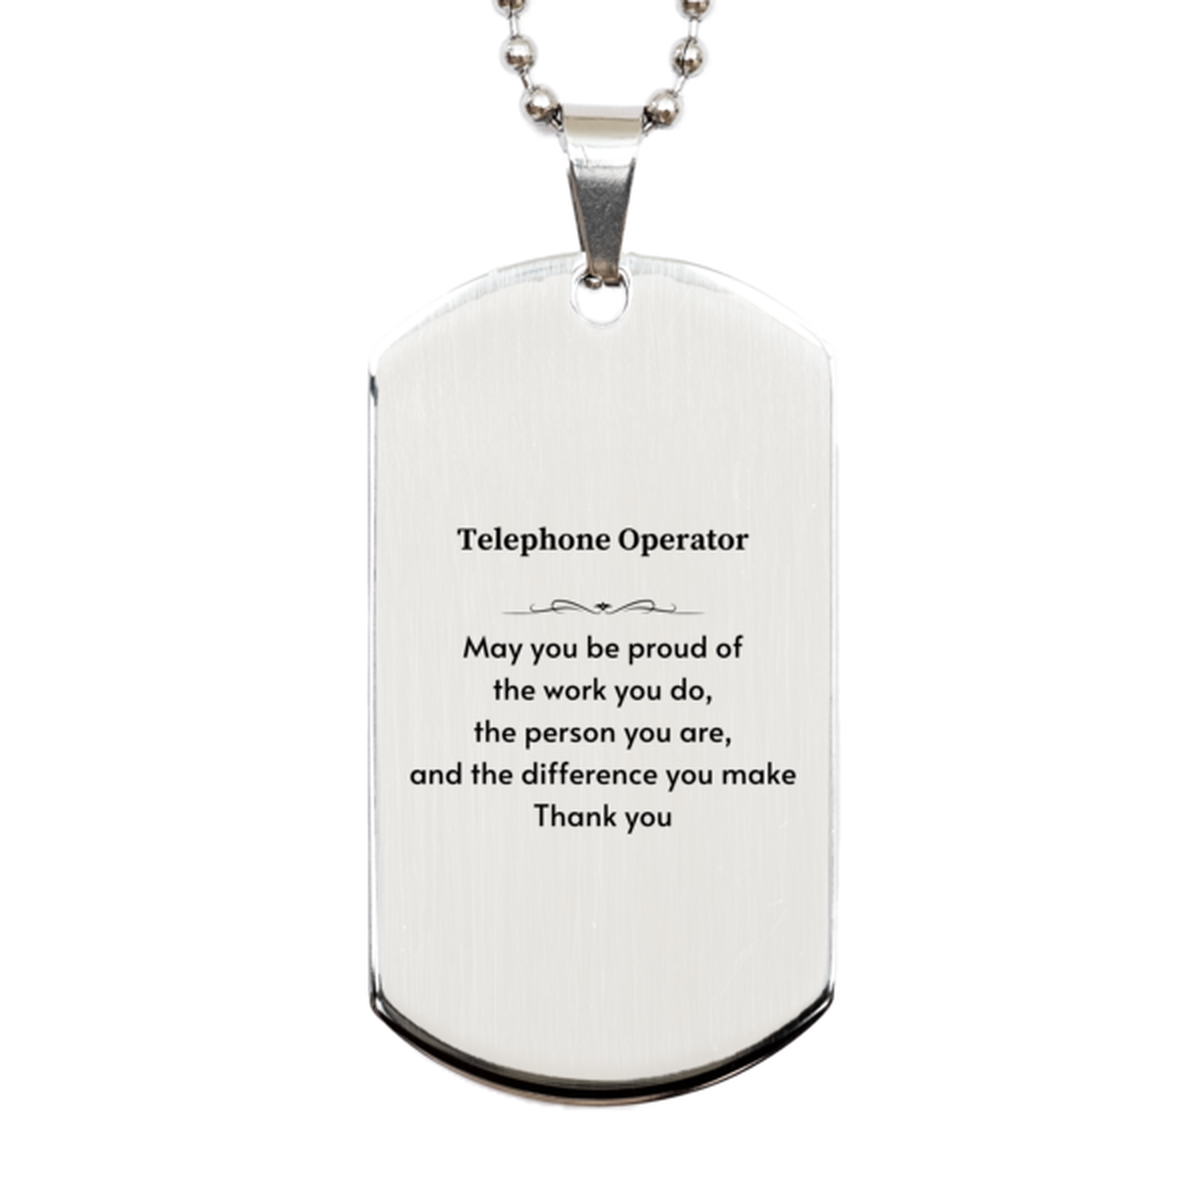 Heartwarming Silver Dog Tag Retirement Coworkers Gifts for Telephone Operator, Telephone Operator May You be proud of the work you do, the person you are Gifts for Boss Men Women Friends